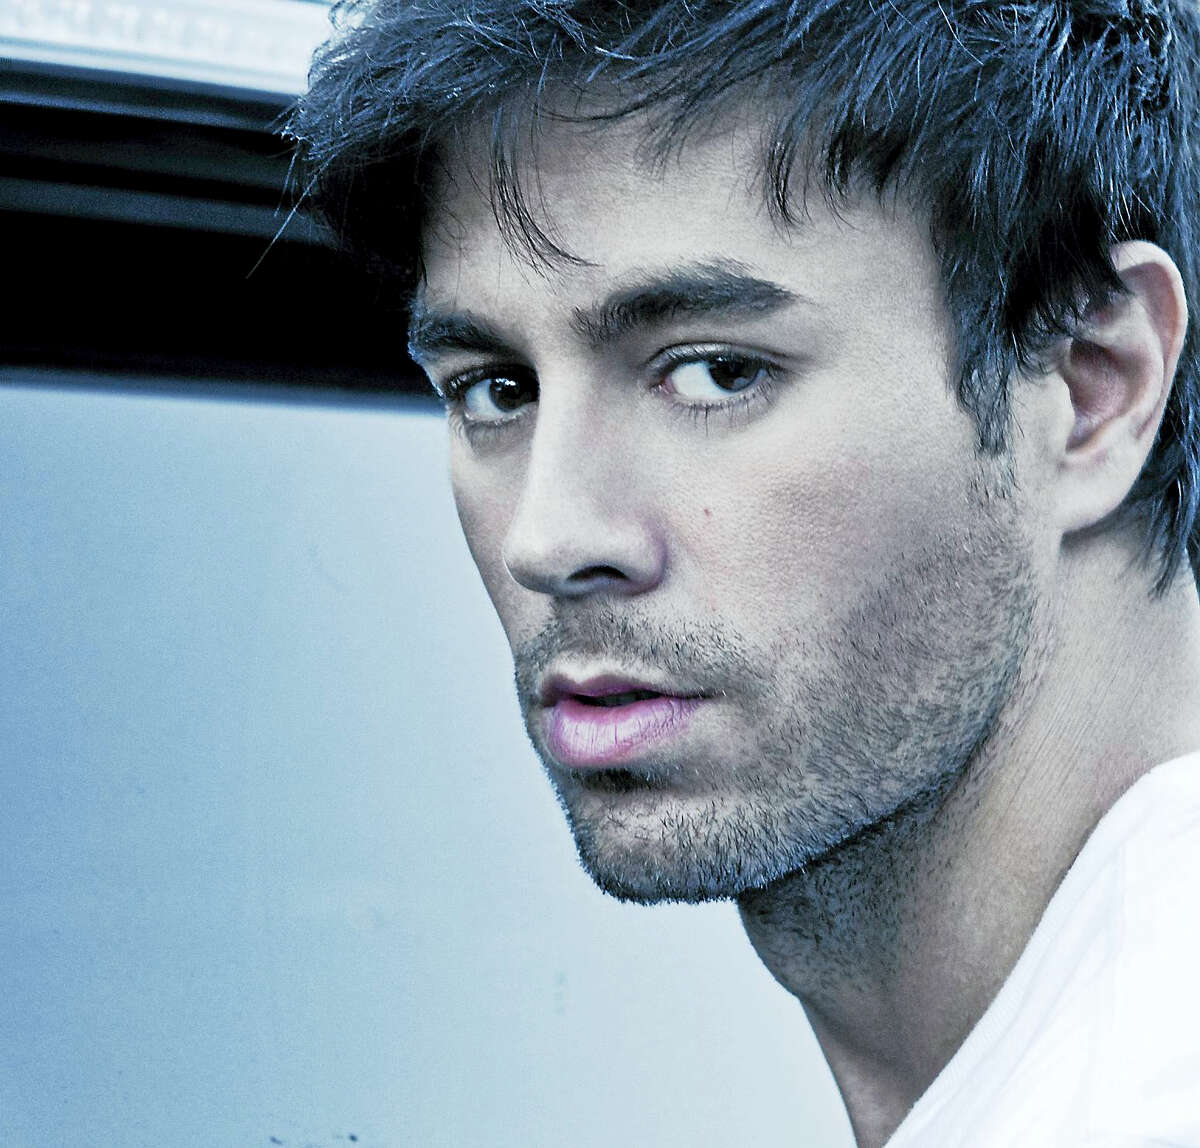 Enrique Iglesias will play shows at Foxwoods on Thursday and Friday.